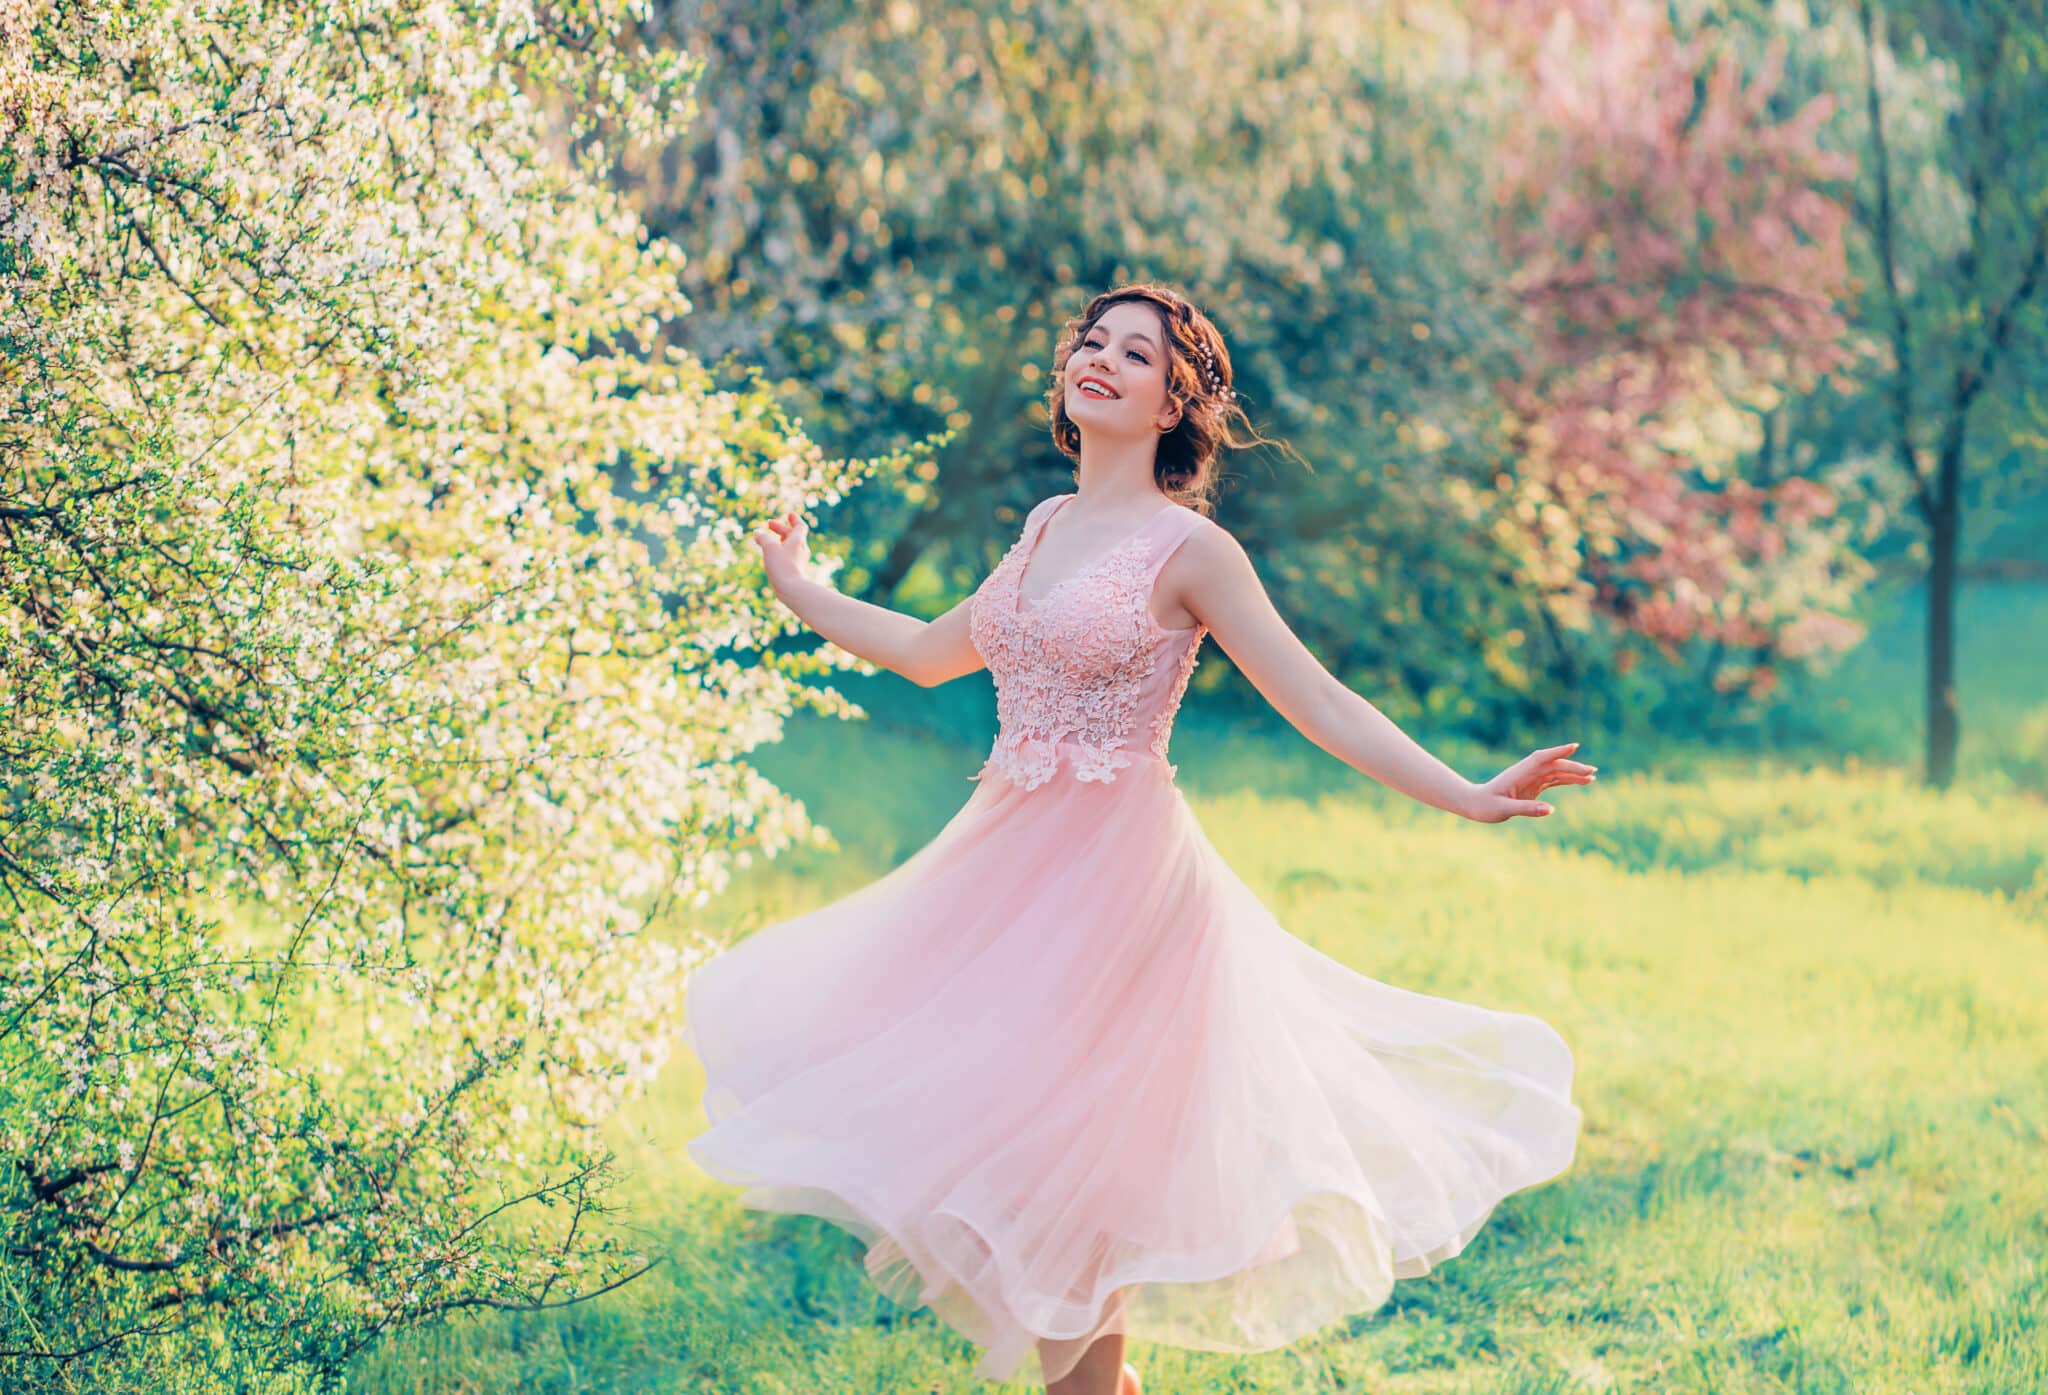 happy girl in short flying gentle pink dress laughs joyfully, doll princess whirls in bright yellow spring garden with flowering trees, positive emotions, movement in photo with creative colors.